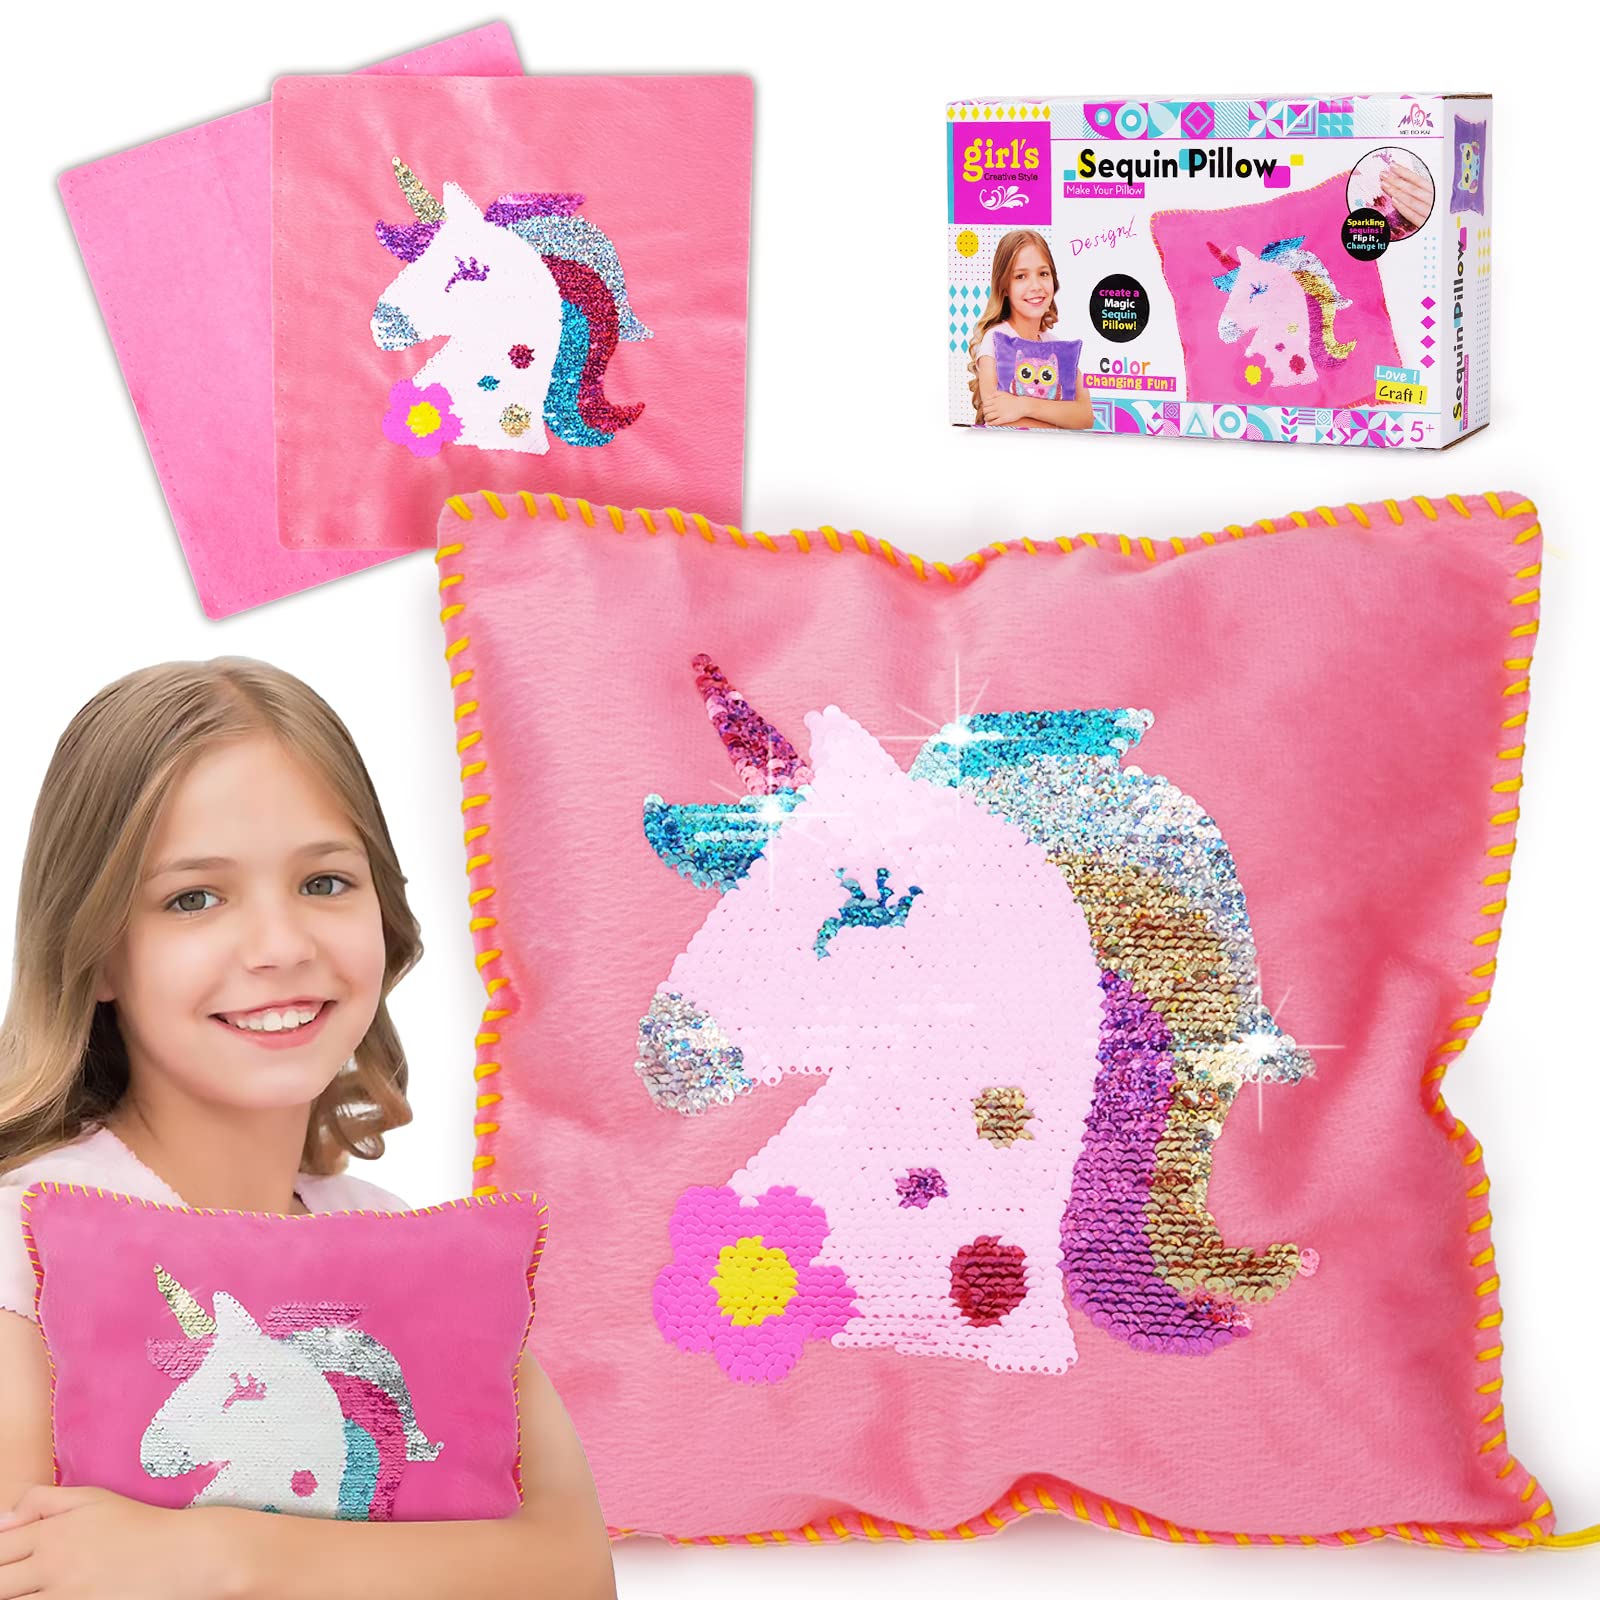 Dream Fun Gift for 7 Year Old Girl Craft Kits for Kids Sewing Kits for  Children Handmade Pillow Making Kit for Girls Unicorn Arts and Crafts for  Kids